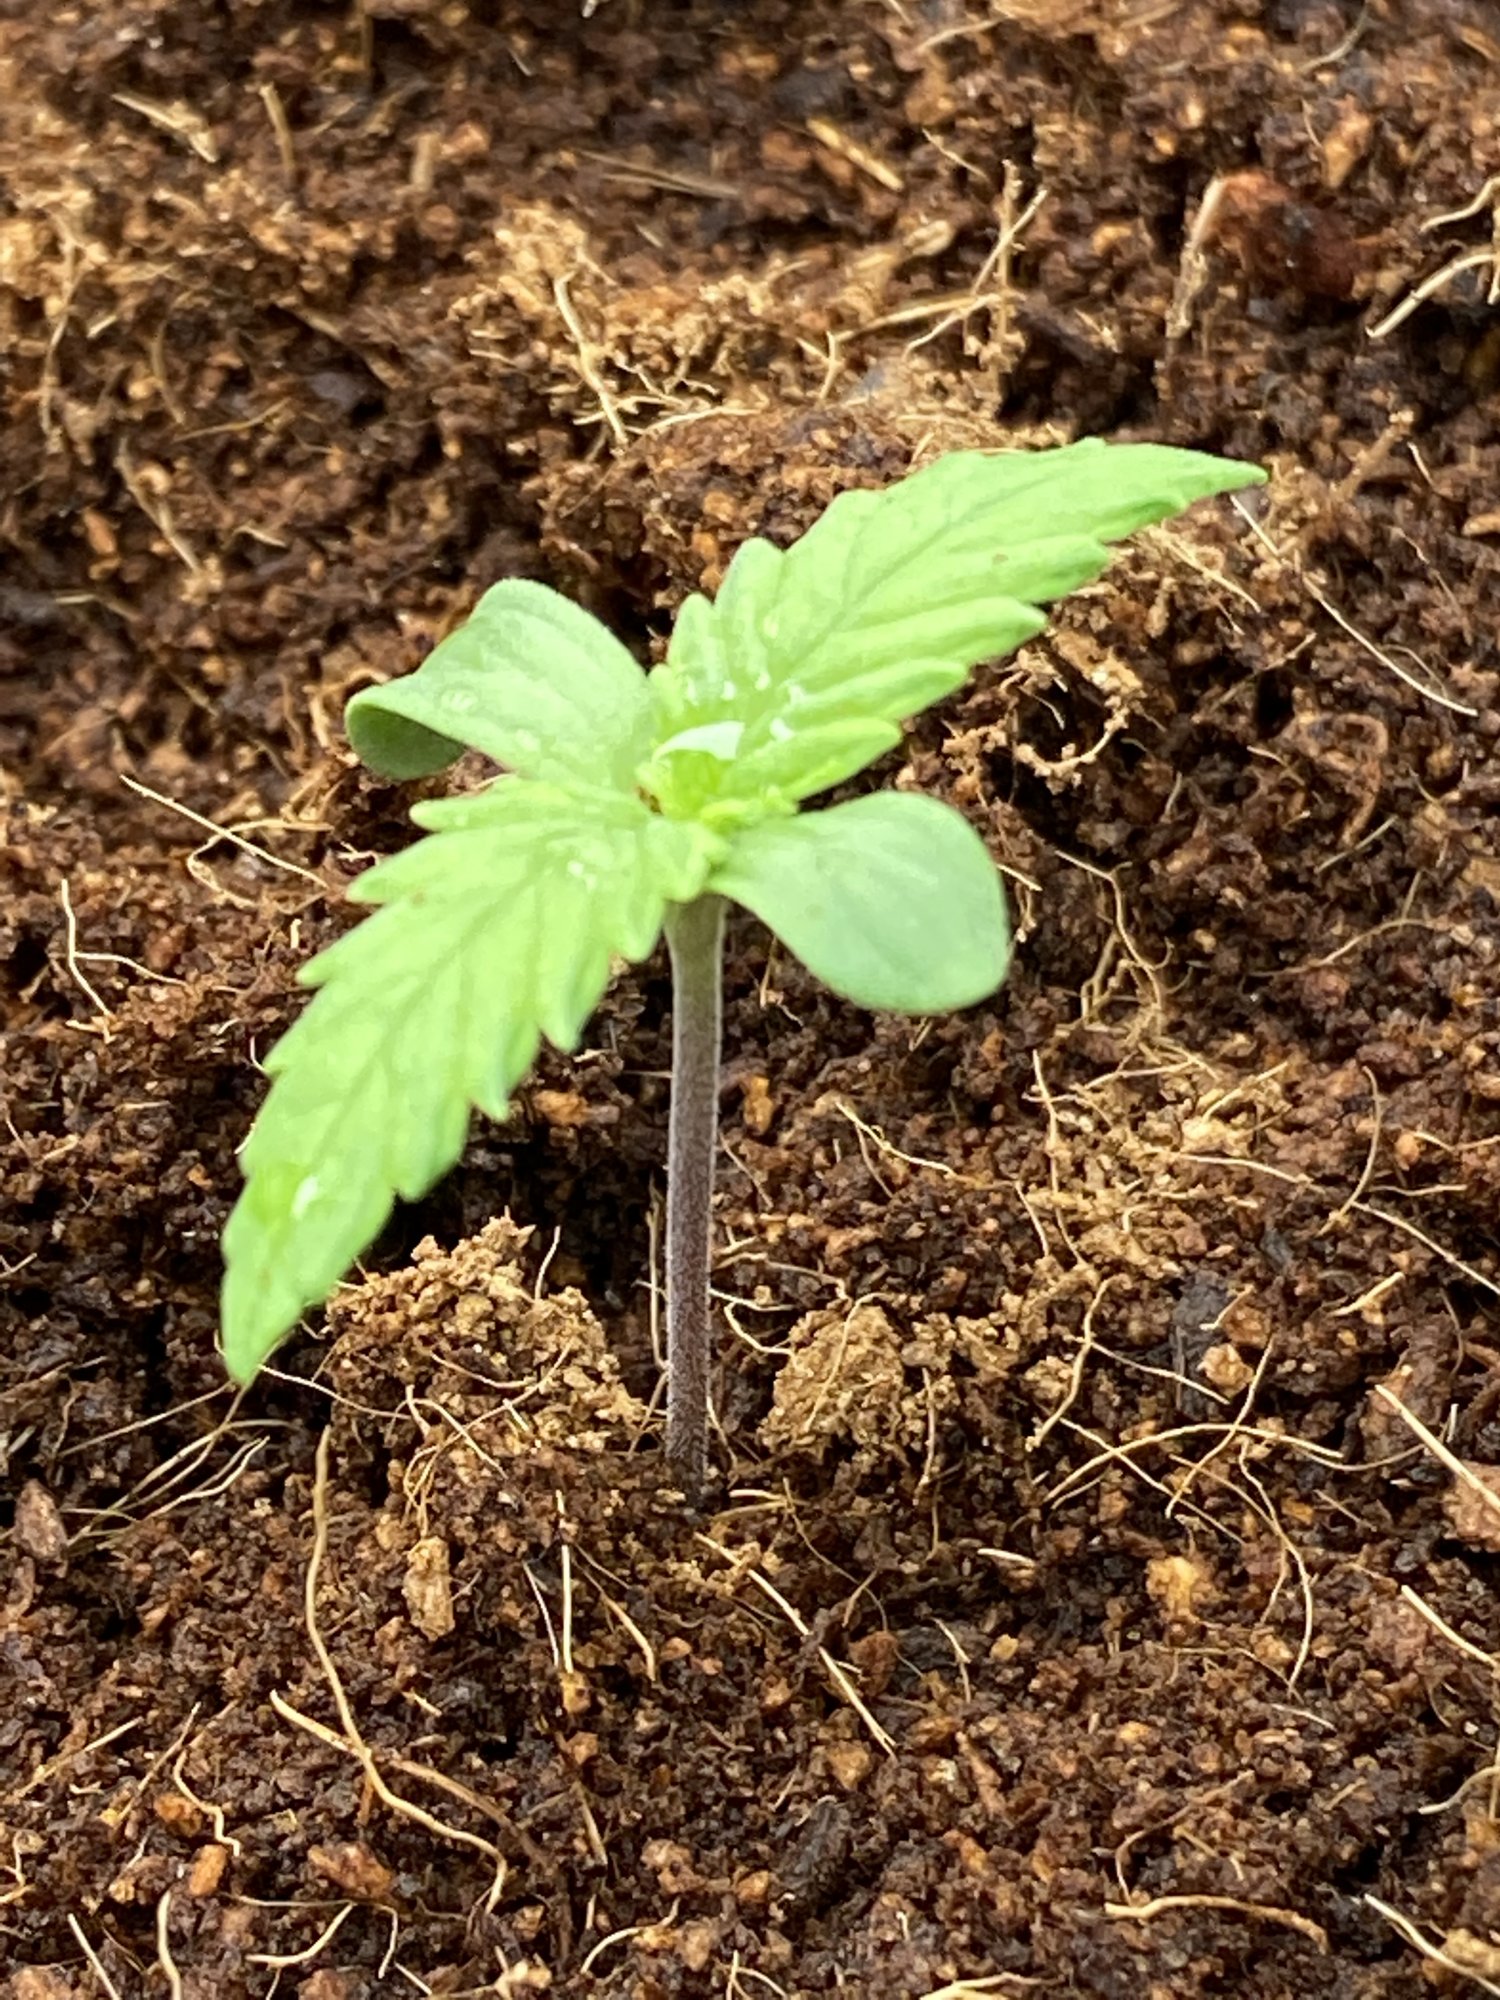 Help with seedling watering in coco